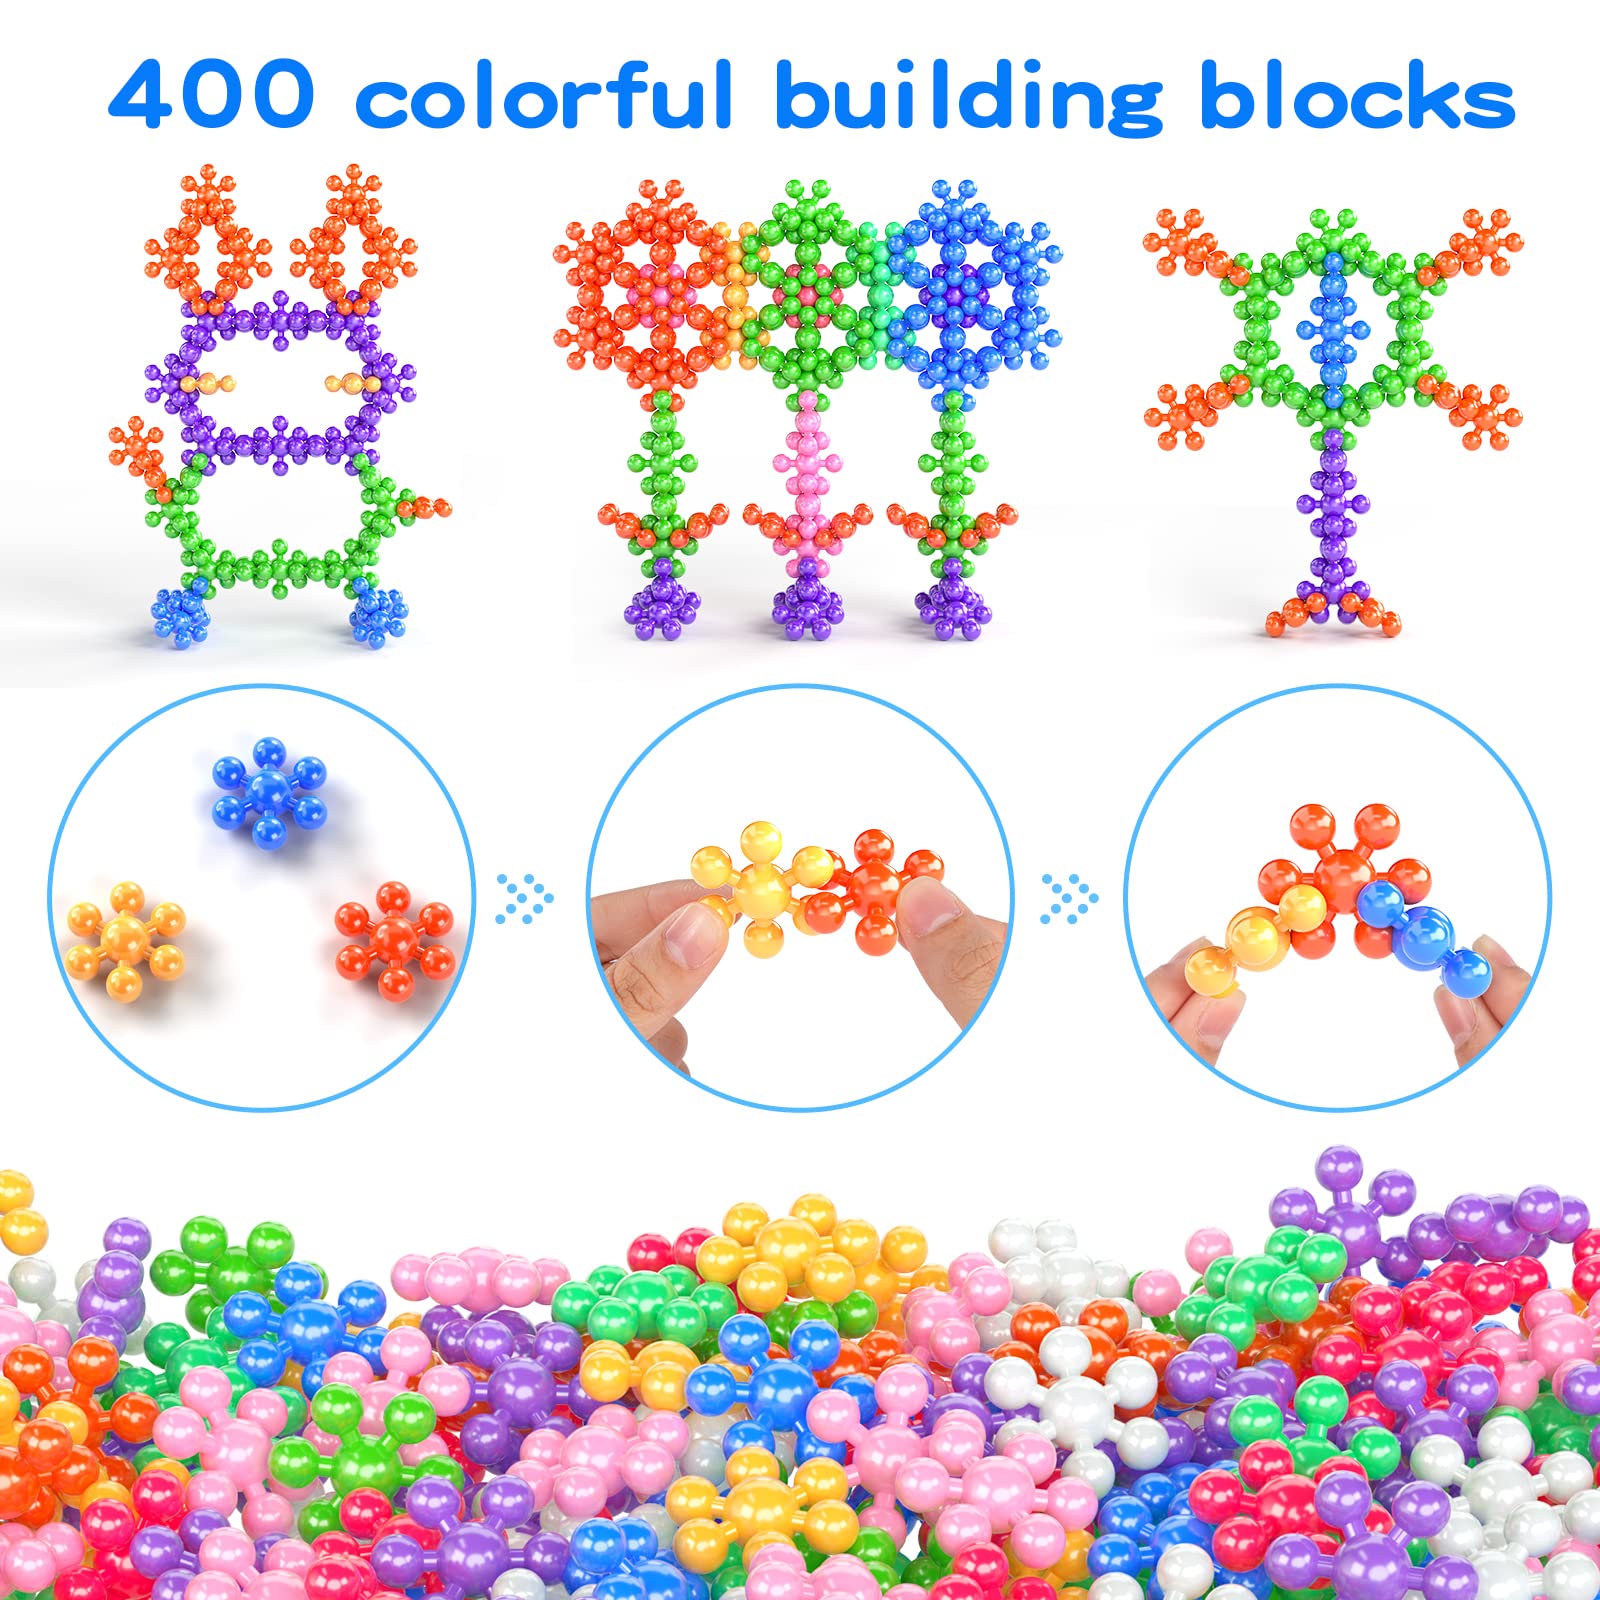 Babyhome 400 Pieces Building Blocks Kids STEM Toys, Interlocking Solid Plastic Educational Toys Sets for Preschool Kids Boys and Girls Aged 3+, Safe Material Creativity Kids Toys